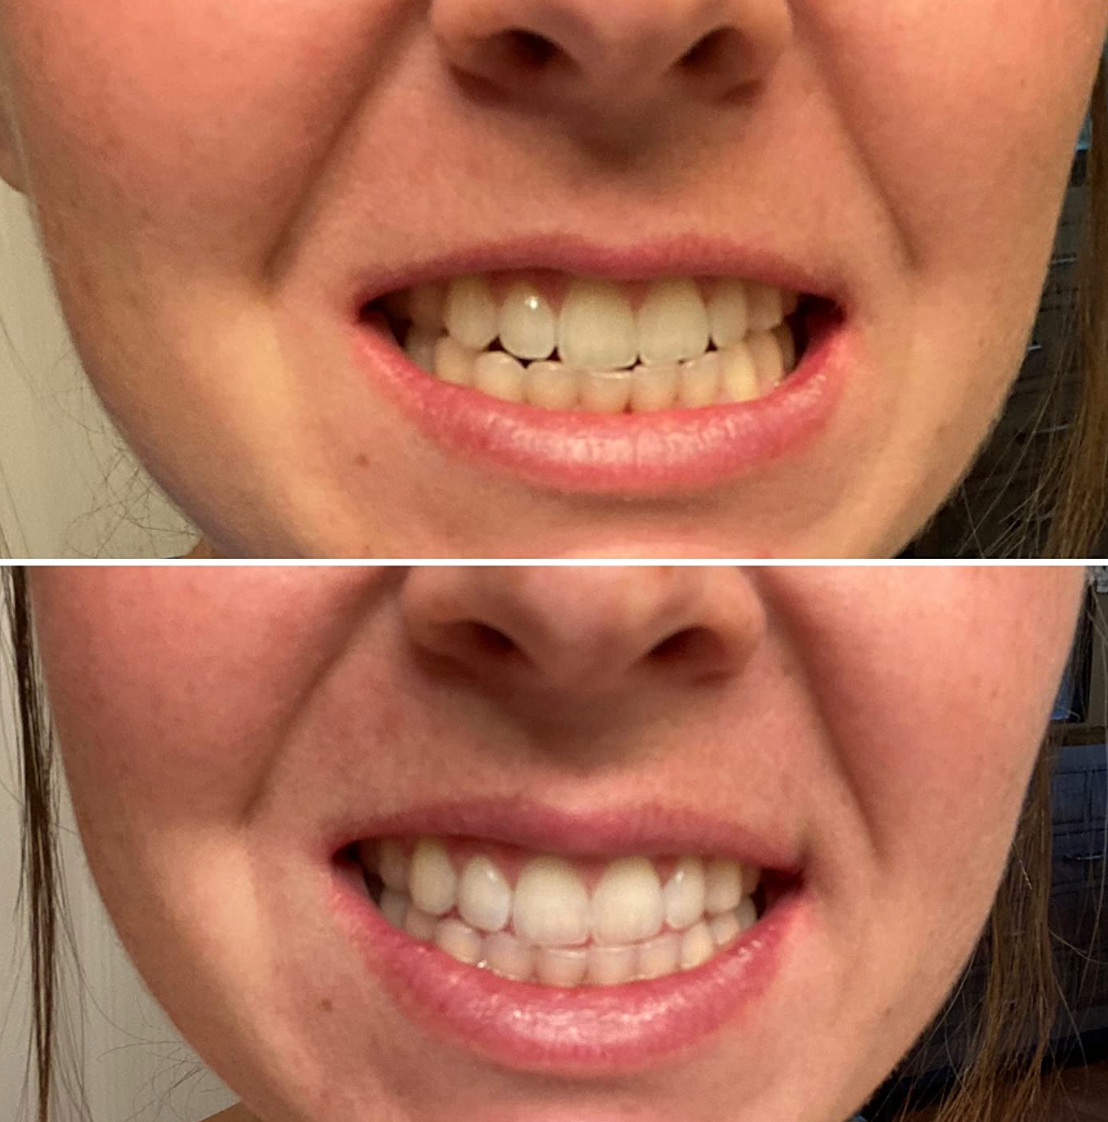 reviewer showing before and after of their teeth for the teeth whitening pens